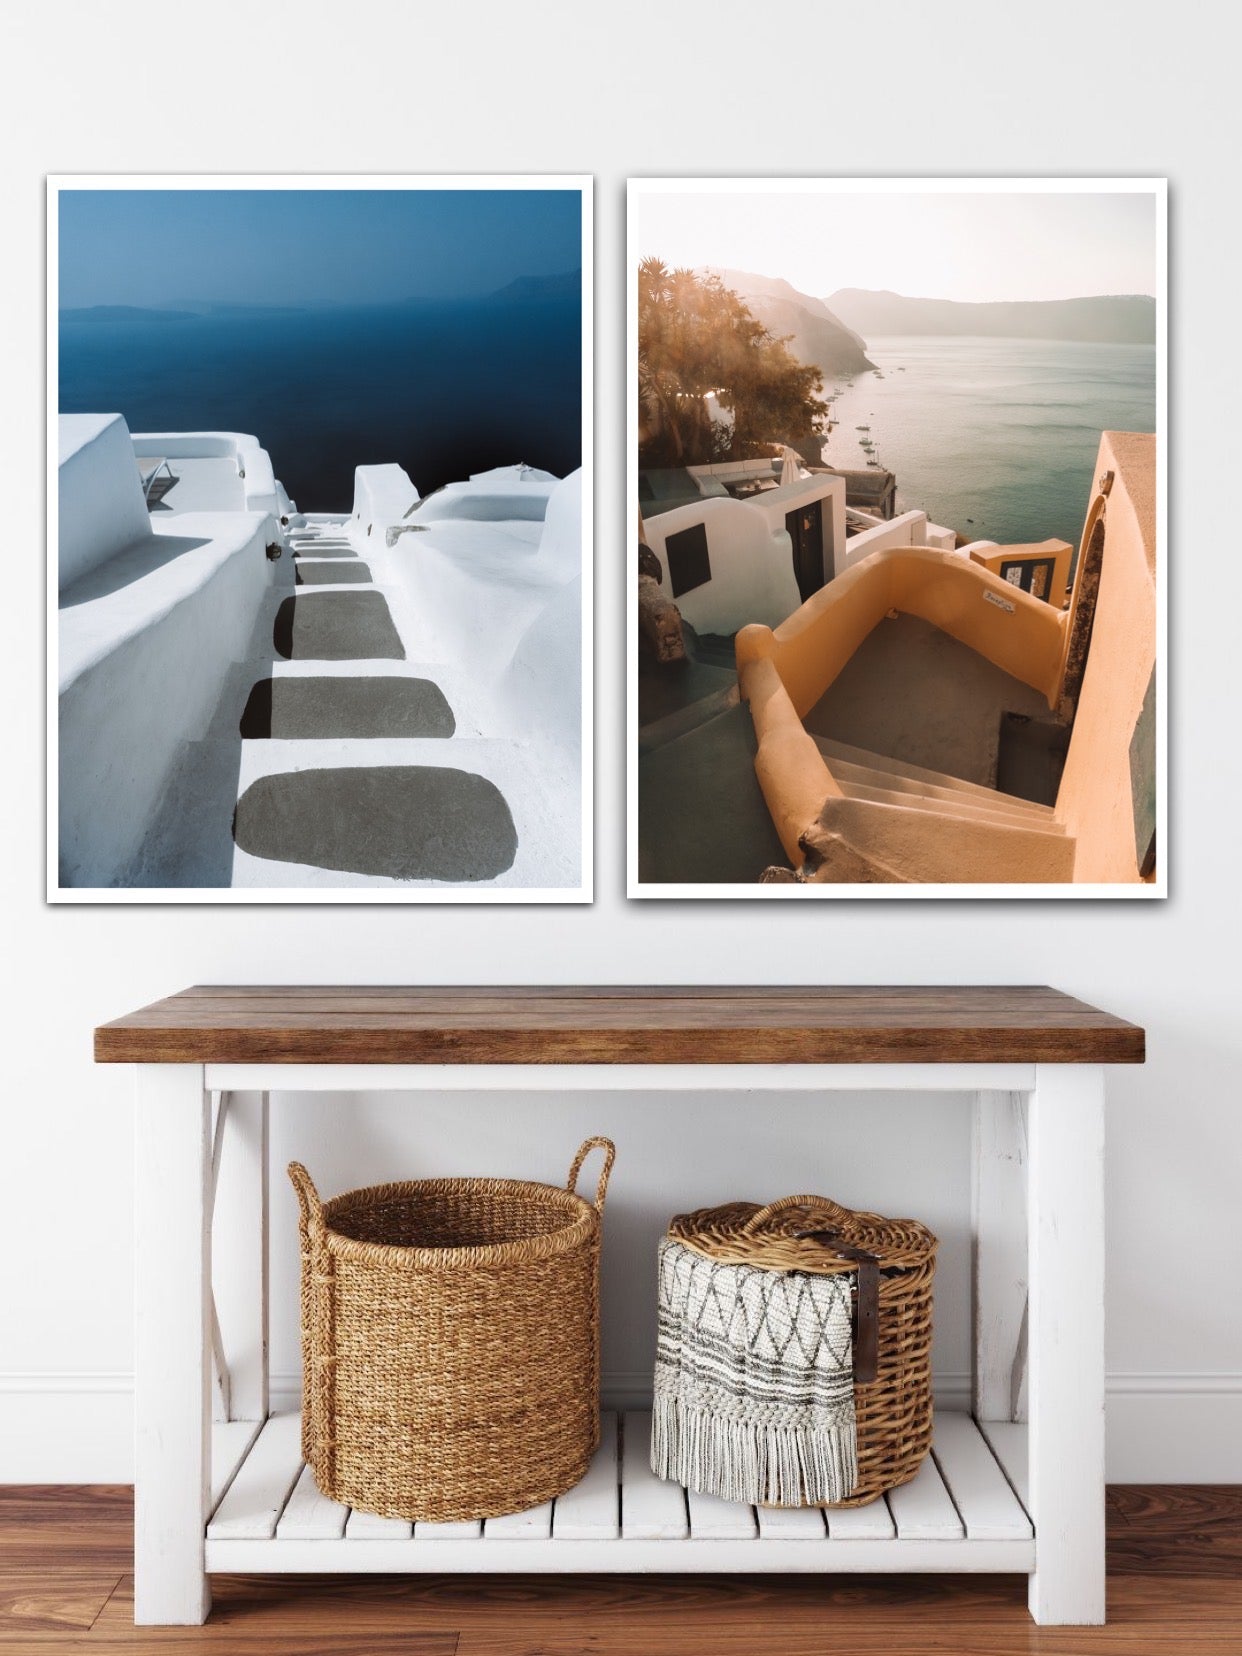 Waking up in Oia Santorini in the Greek Islands. White washed buildings and dreamy views